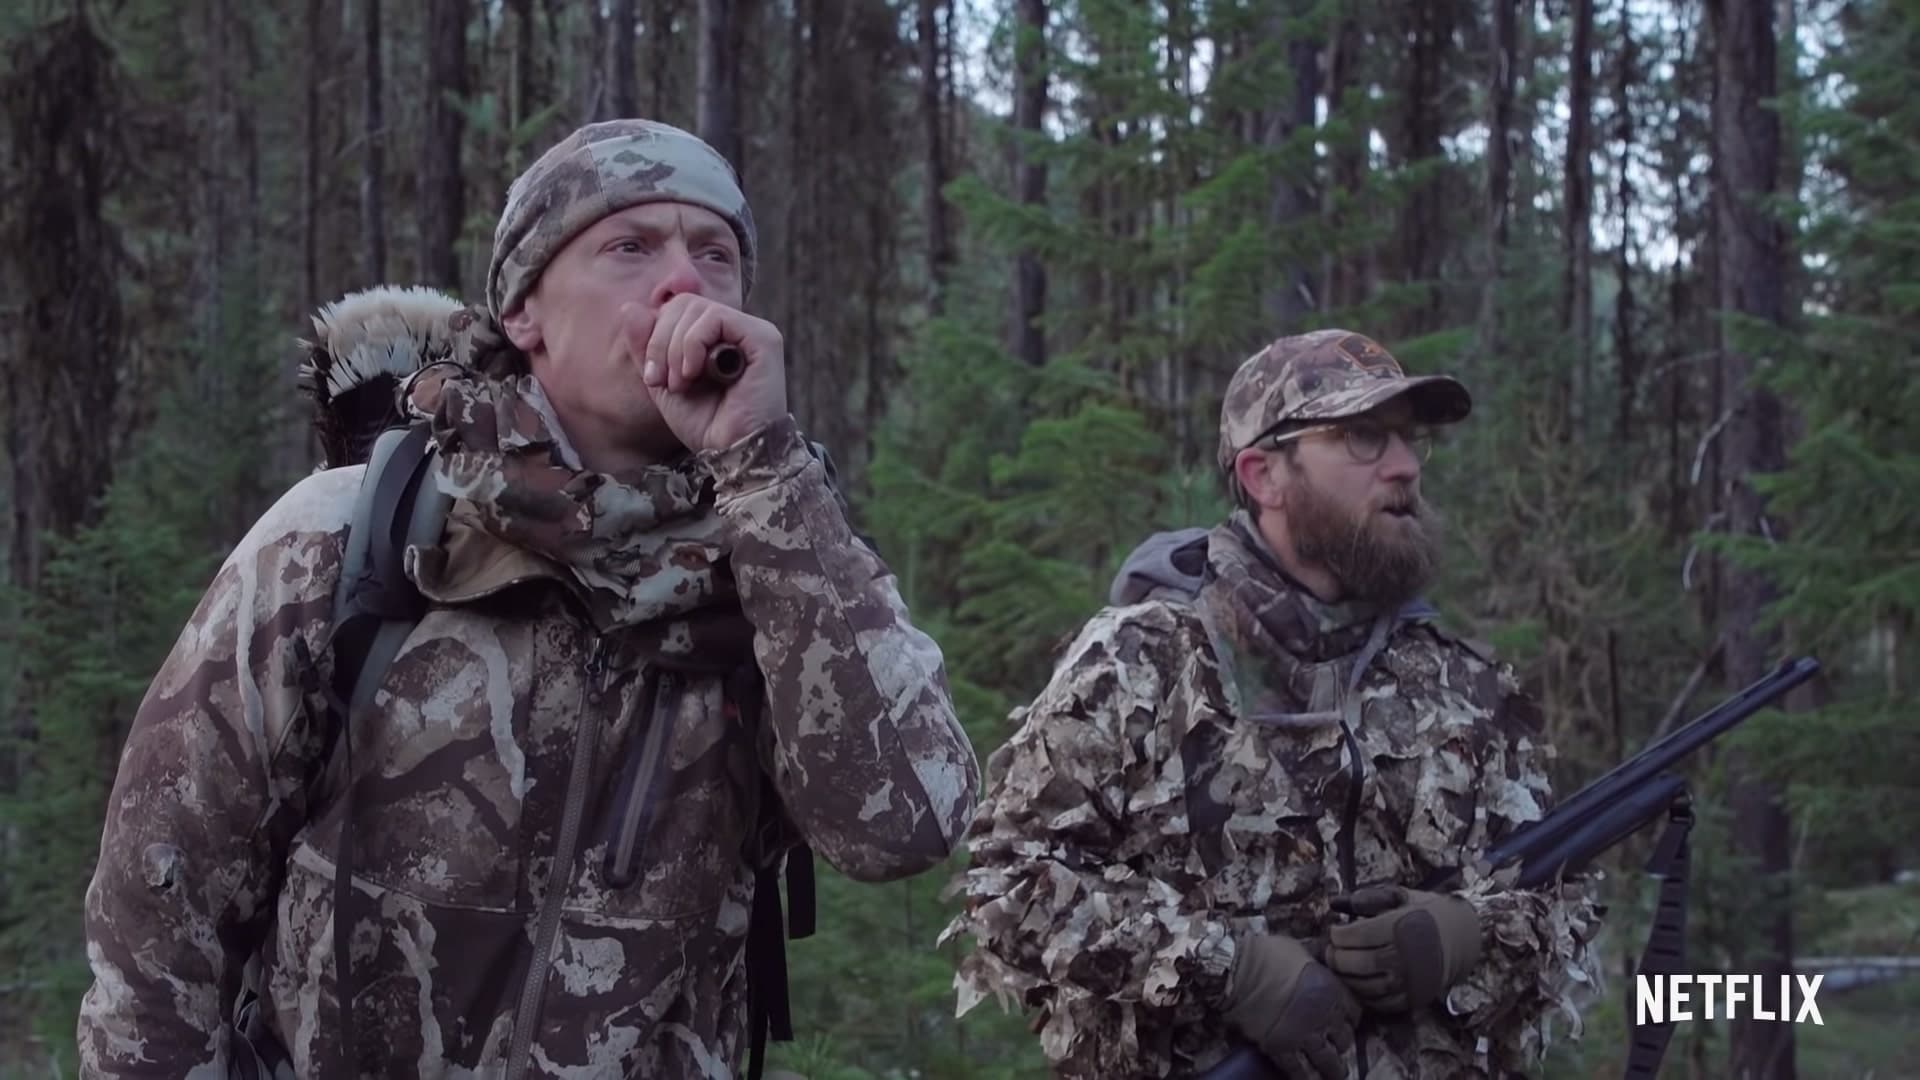 Netflix MeatEater Season 9 Part 2 Trailer, Netflix Nature Shows, Netflix Outdoor Shows, Steven Rinella MeatEater, Coming to Netflix in February 2021